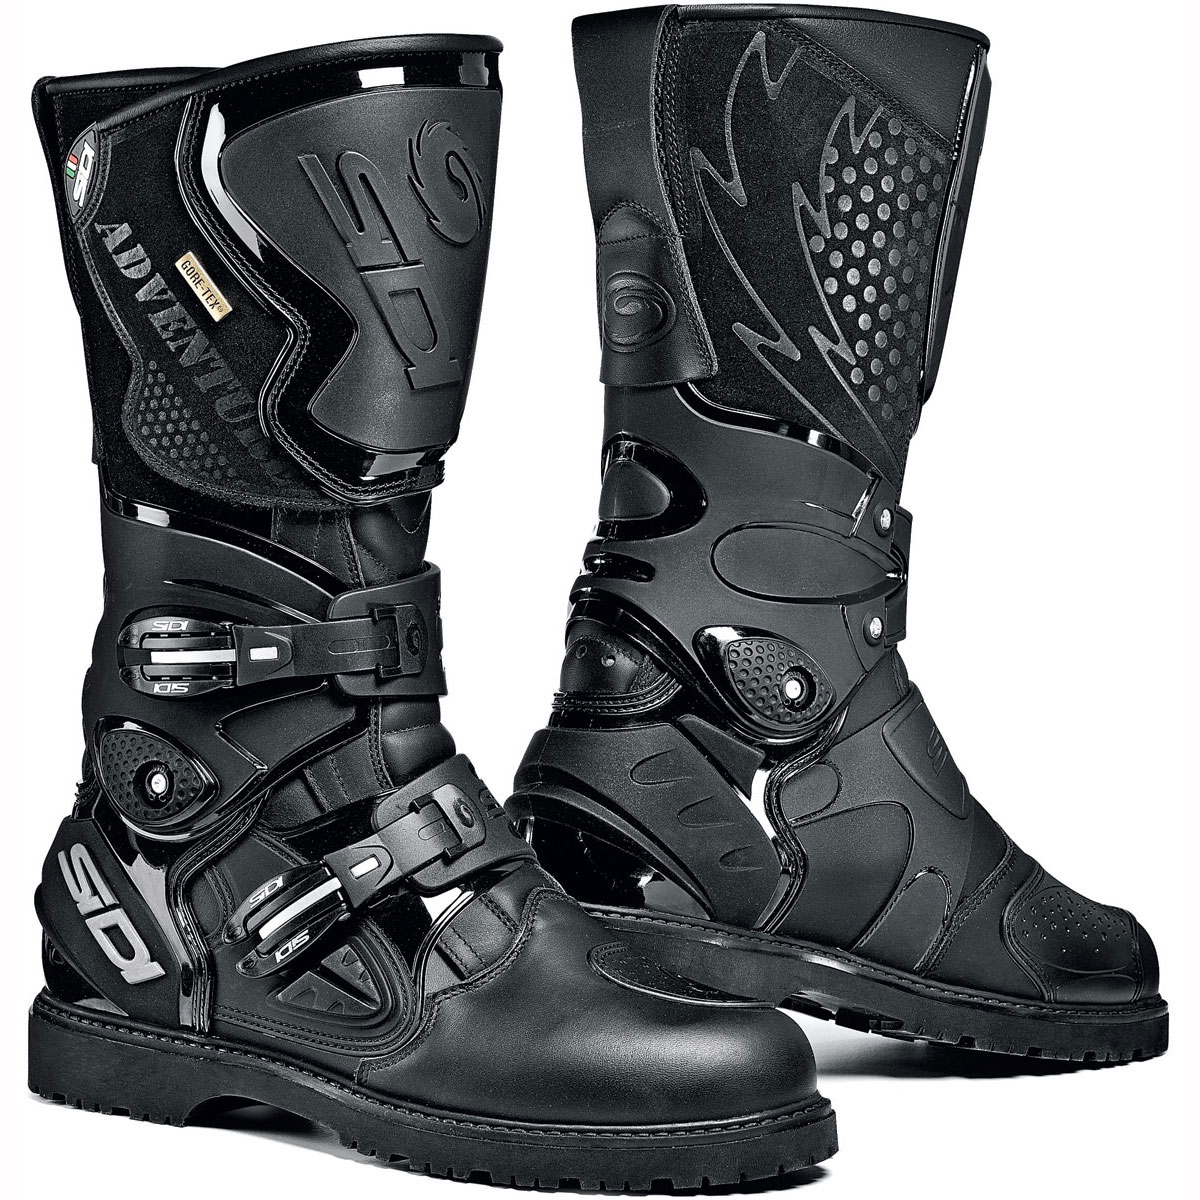 Riding Boots Part 1 - Choosing Your Motorcycle Boots - BikesRepublic